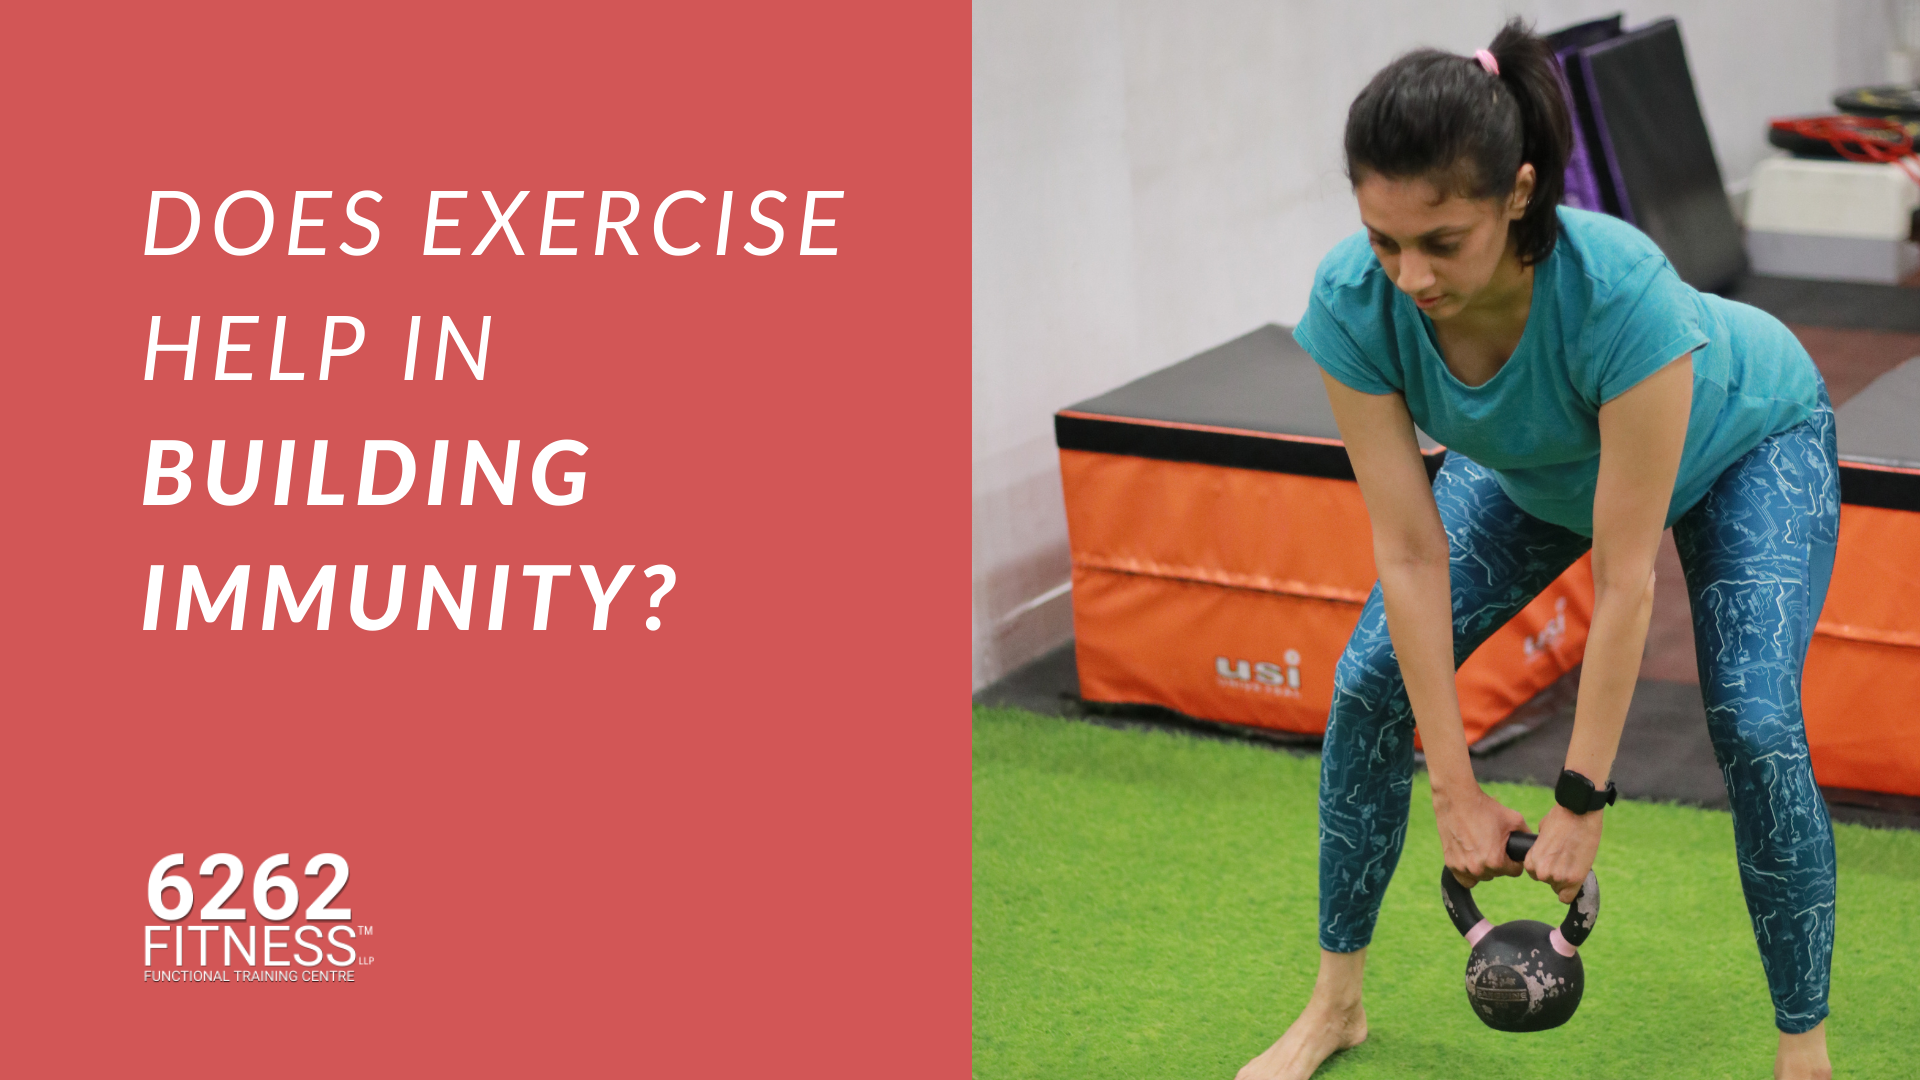 Does exercise help in building immunity?